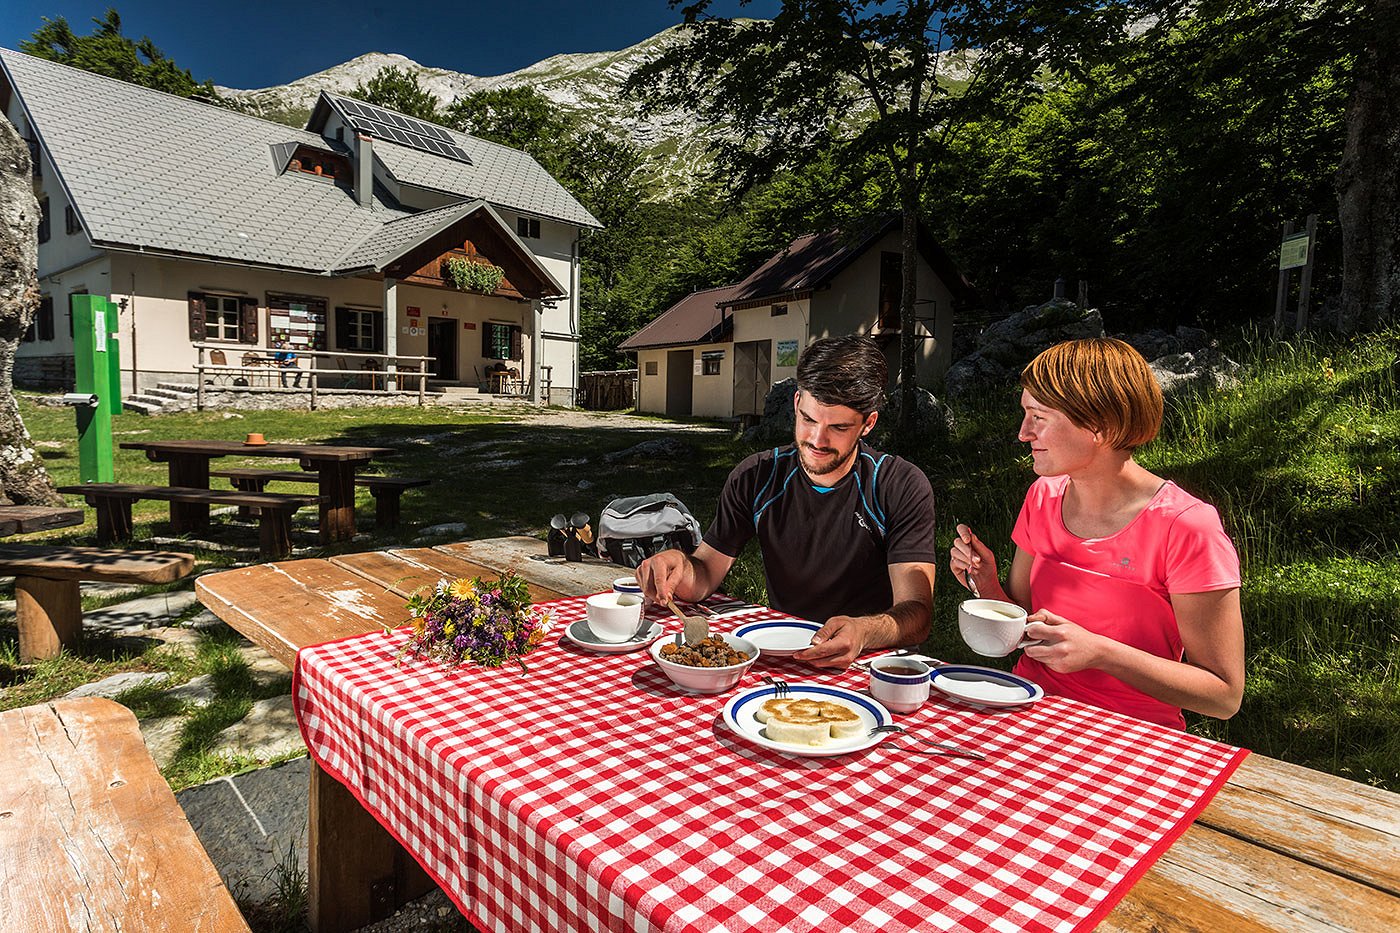 The couple on the bench in front of the hut enjoys excellent mountain dishes